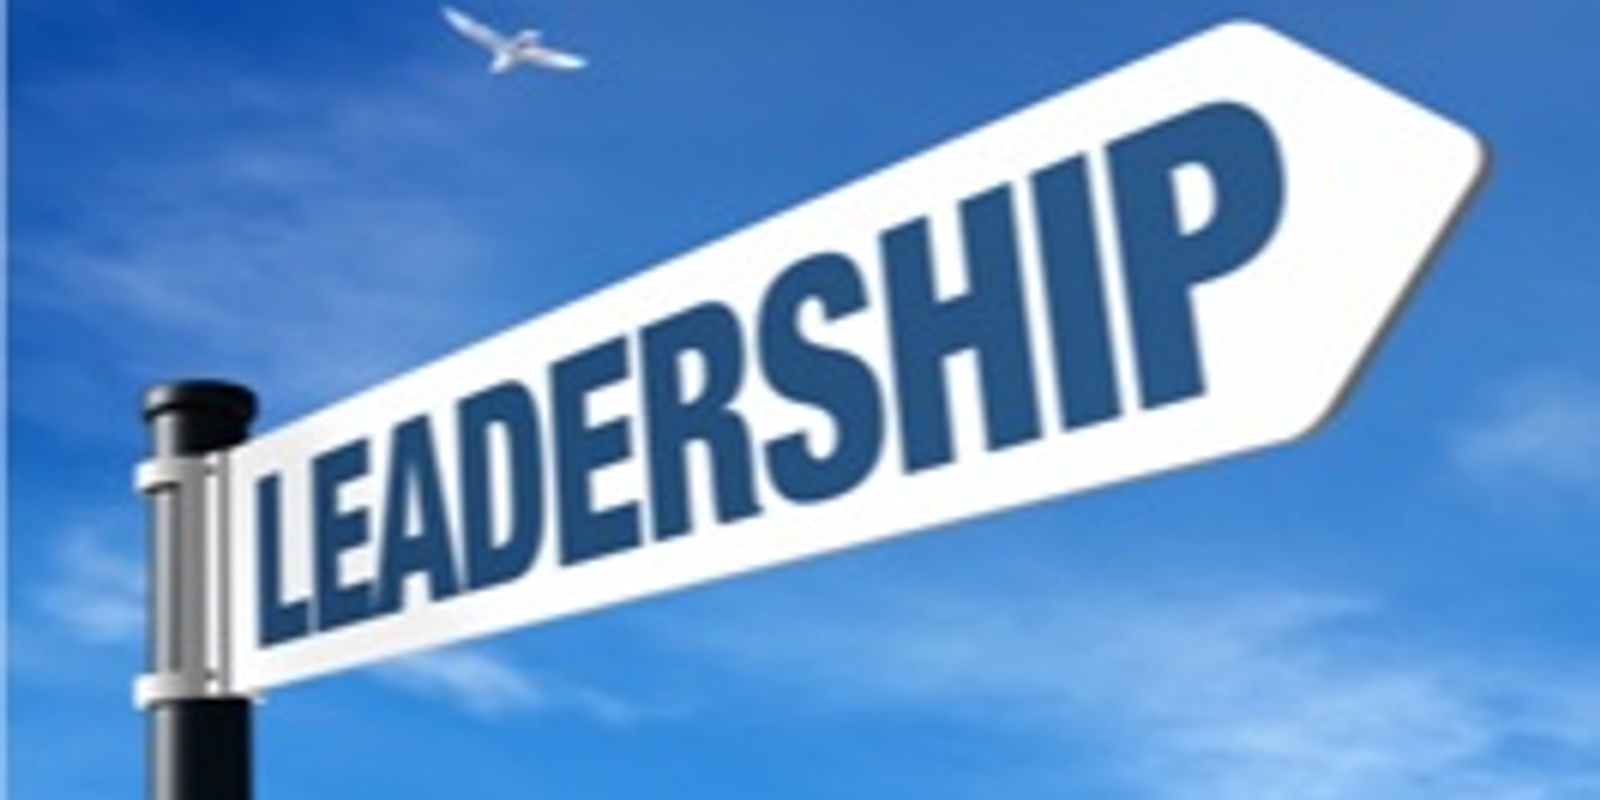 Leadership Development Training - Become THE leader - Online Instructor-led 3hours